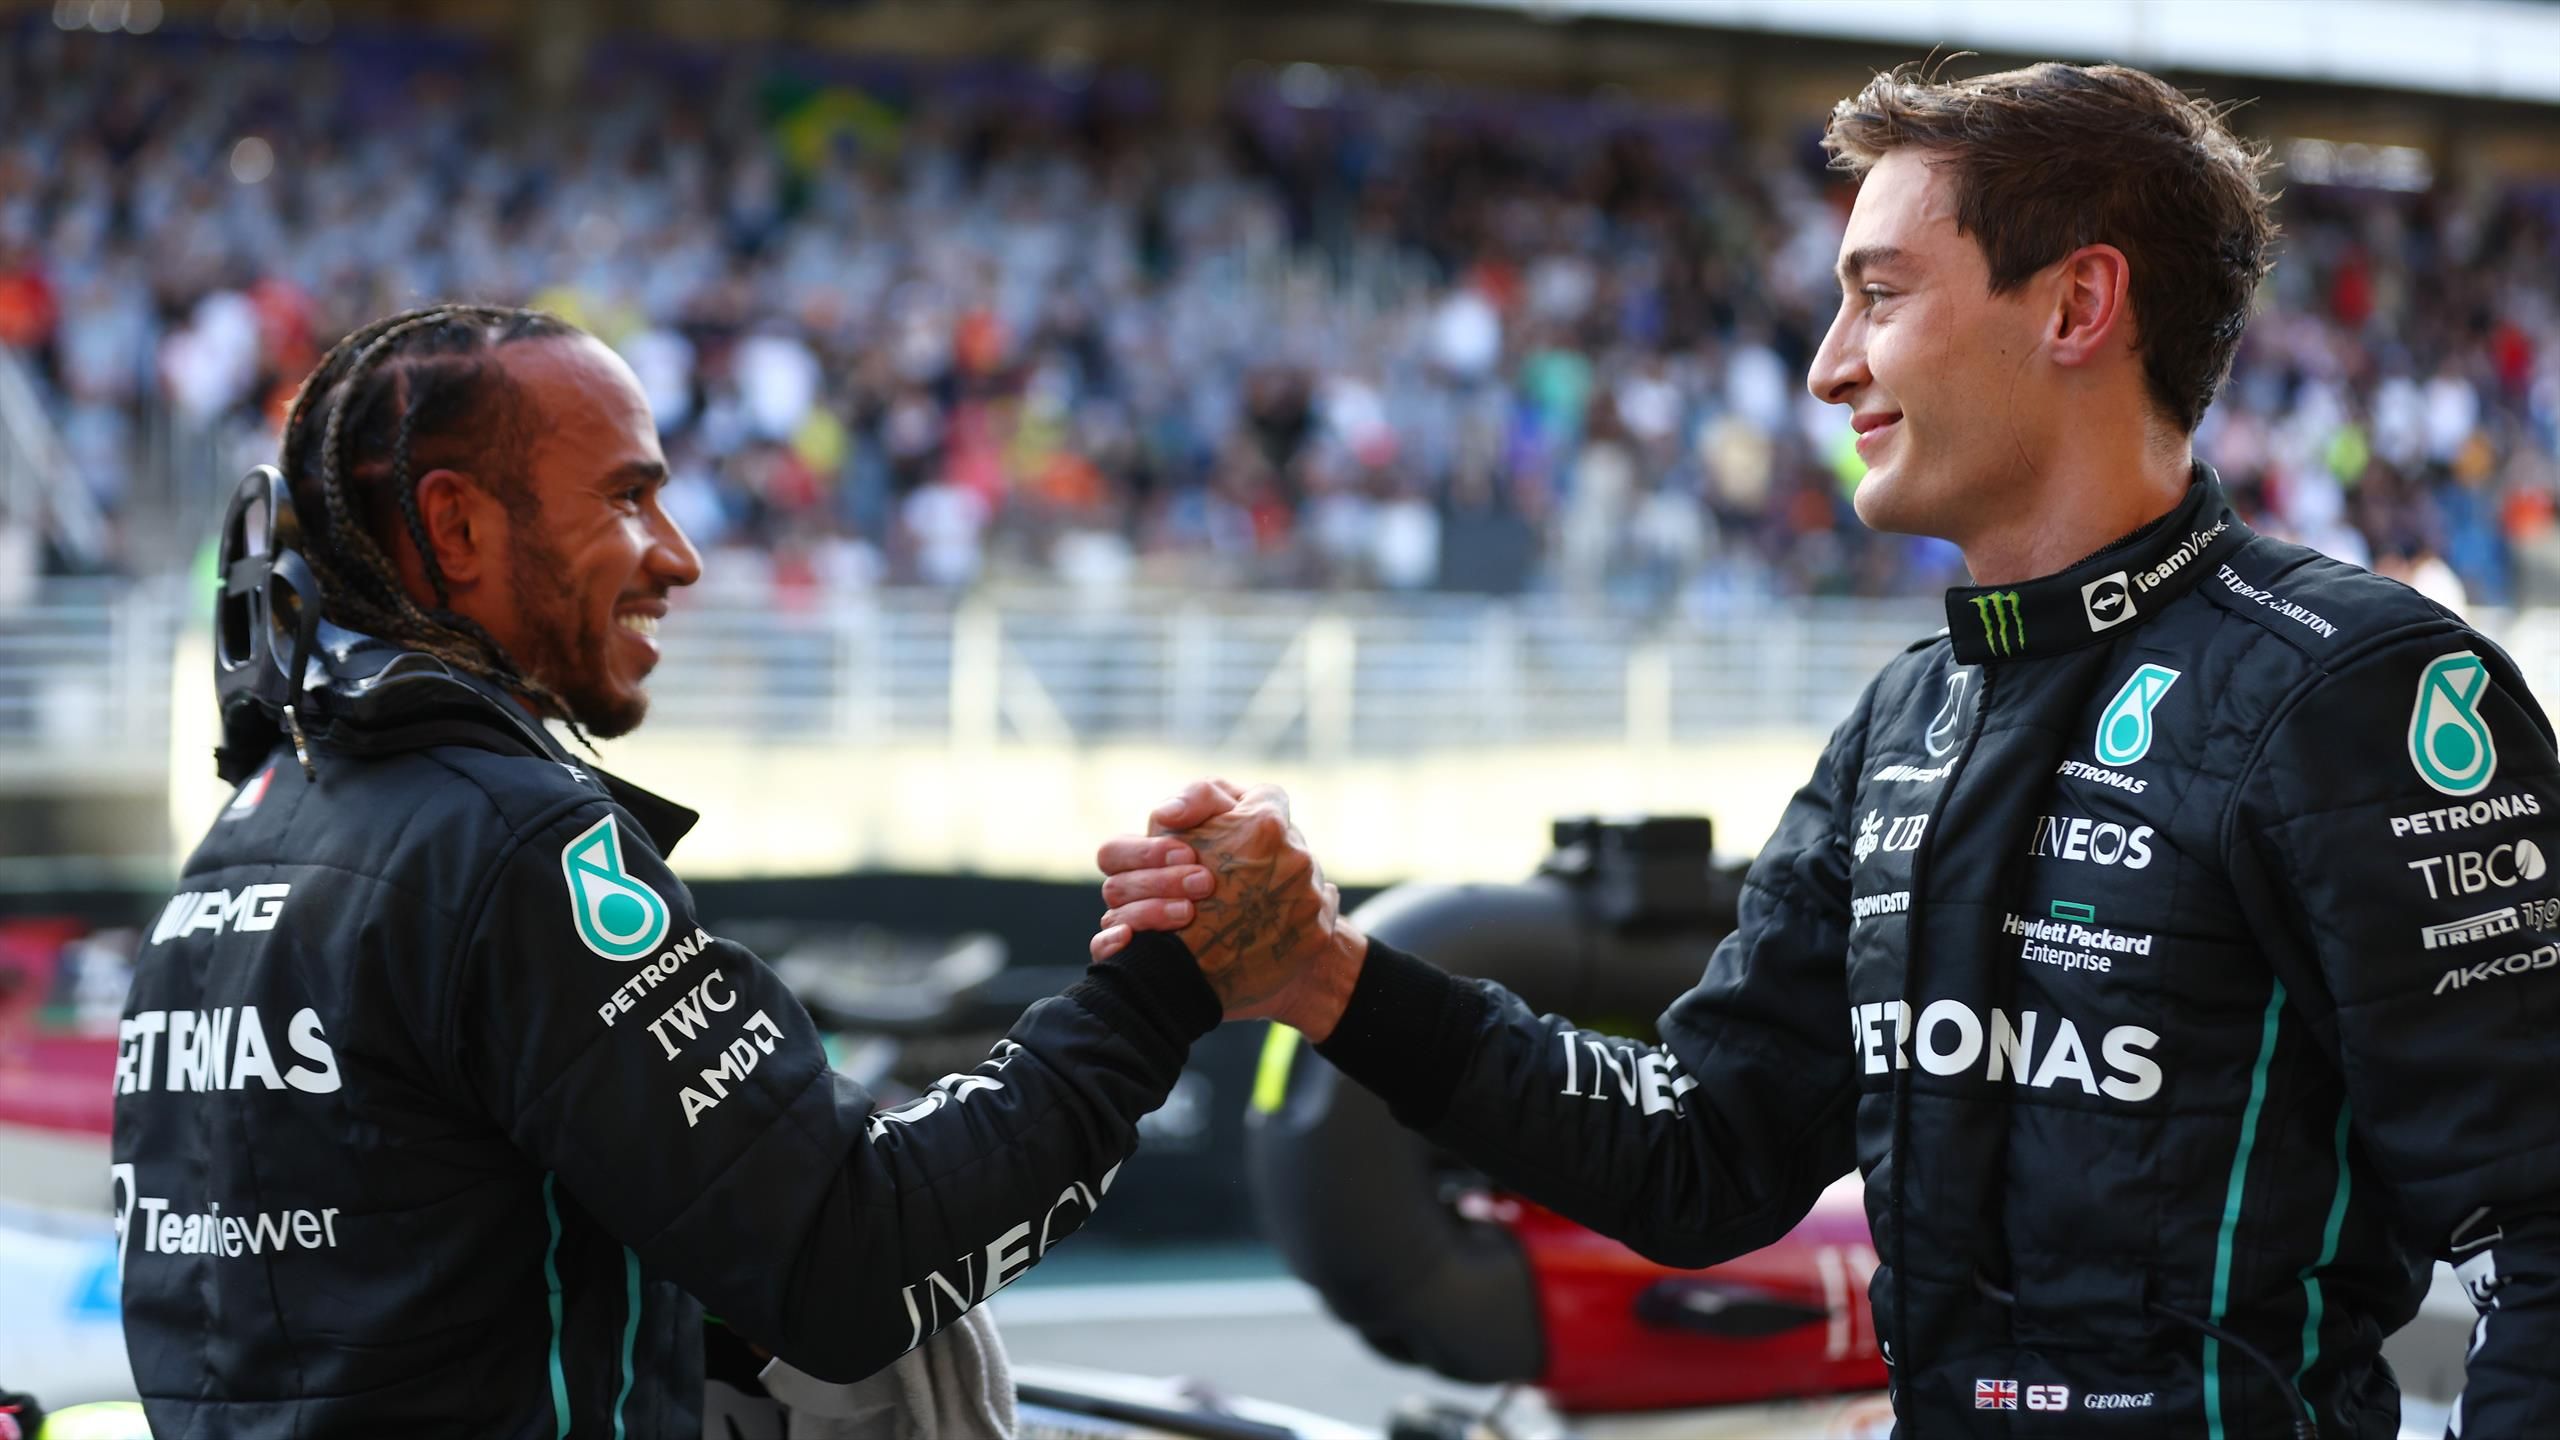 Russell “realised” before the last resumption that he had to forget Hamilton